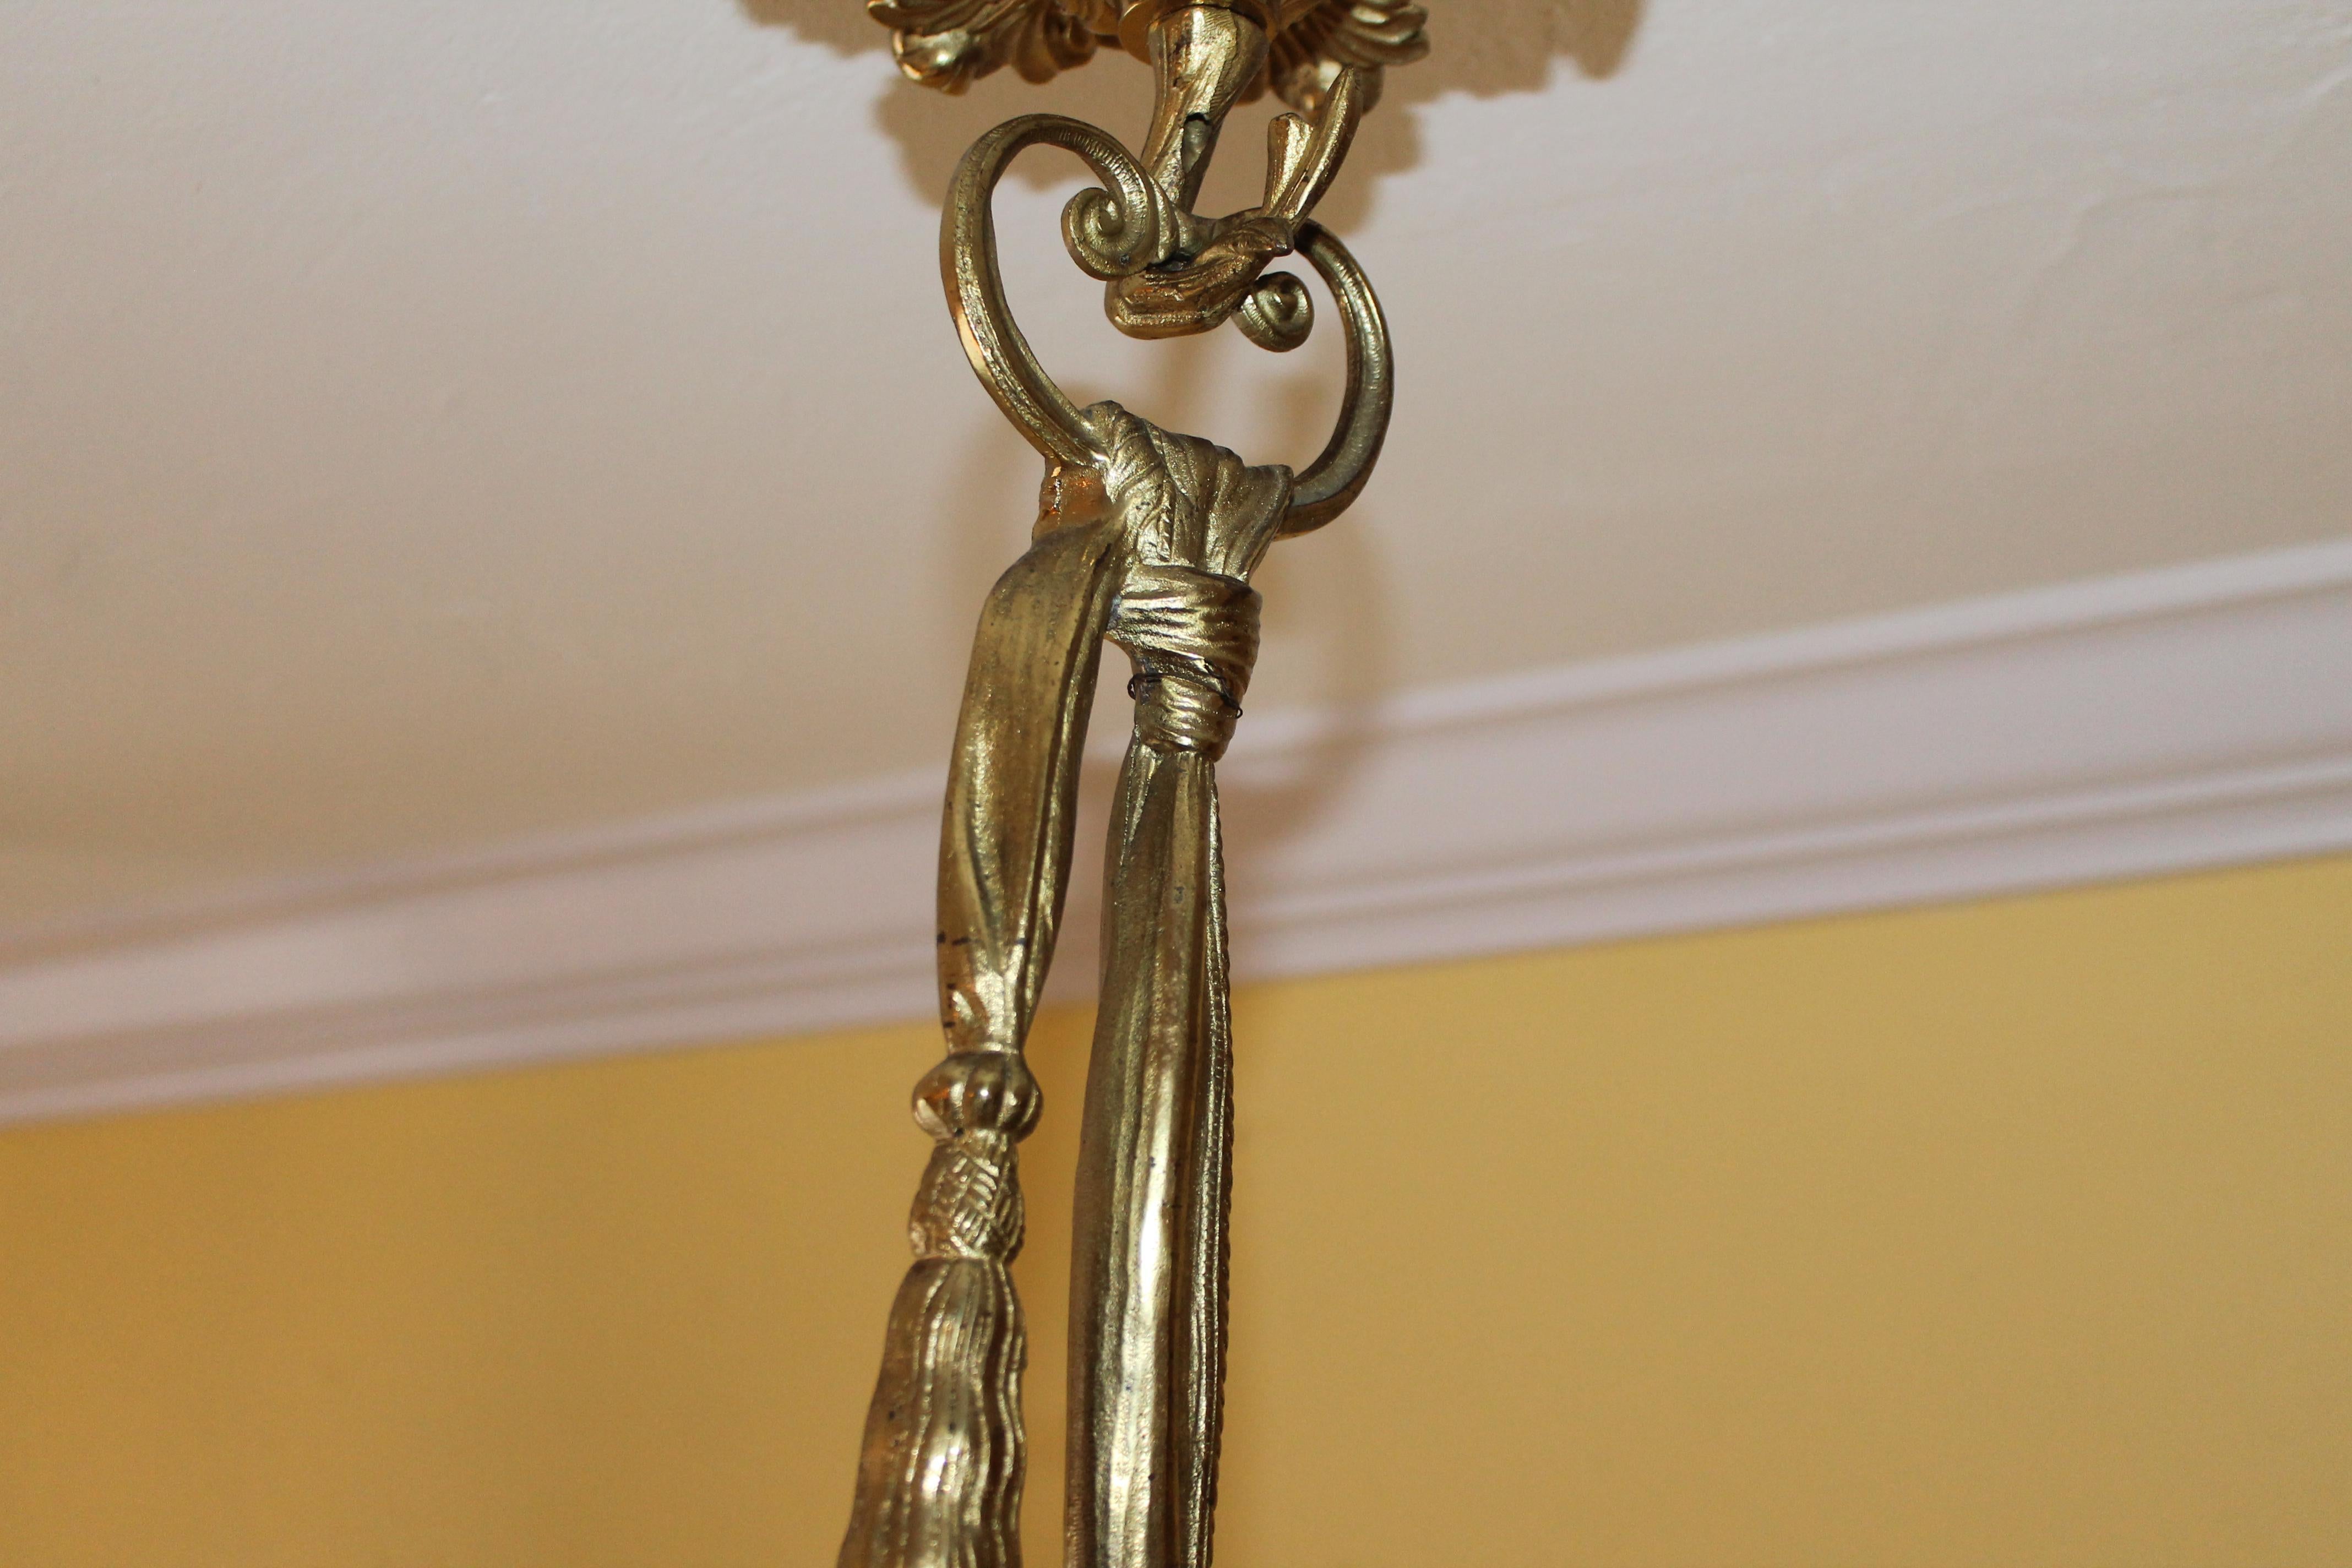 Please look at picture number two as that shows the top tassel detail that is not showing on the main picture. On offer 19thc French Louis XVI Gilt Bronze Gas Converted to Electric Chandelier. This is a heavy piece. Floral detail with center fabric